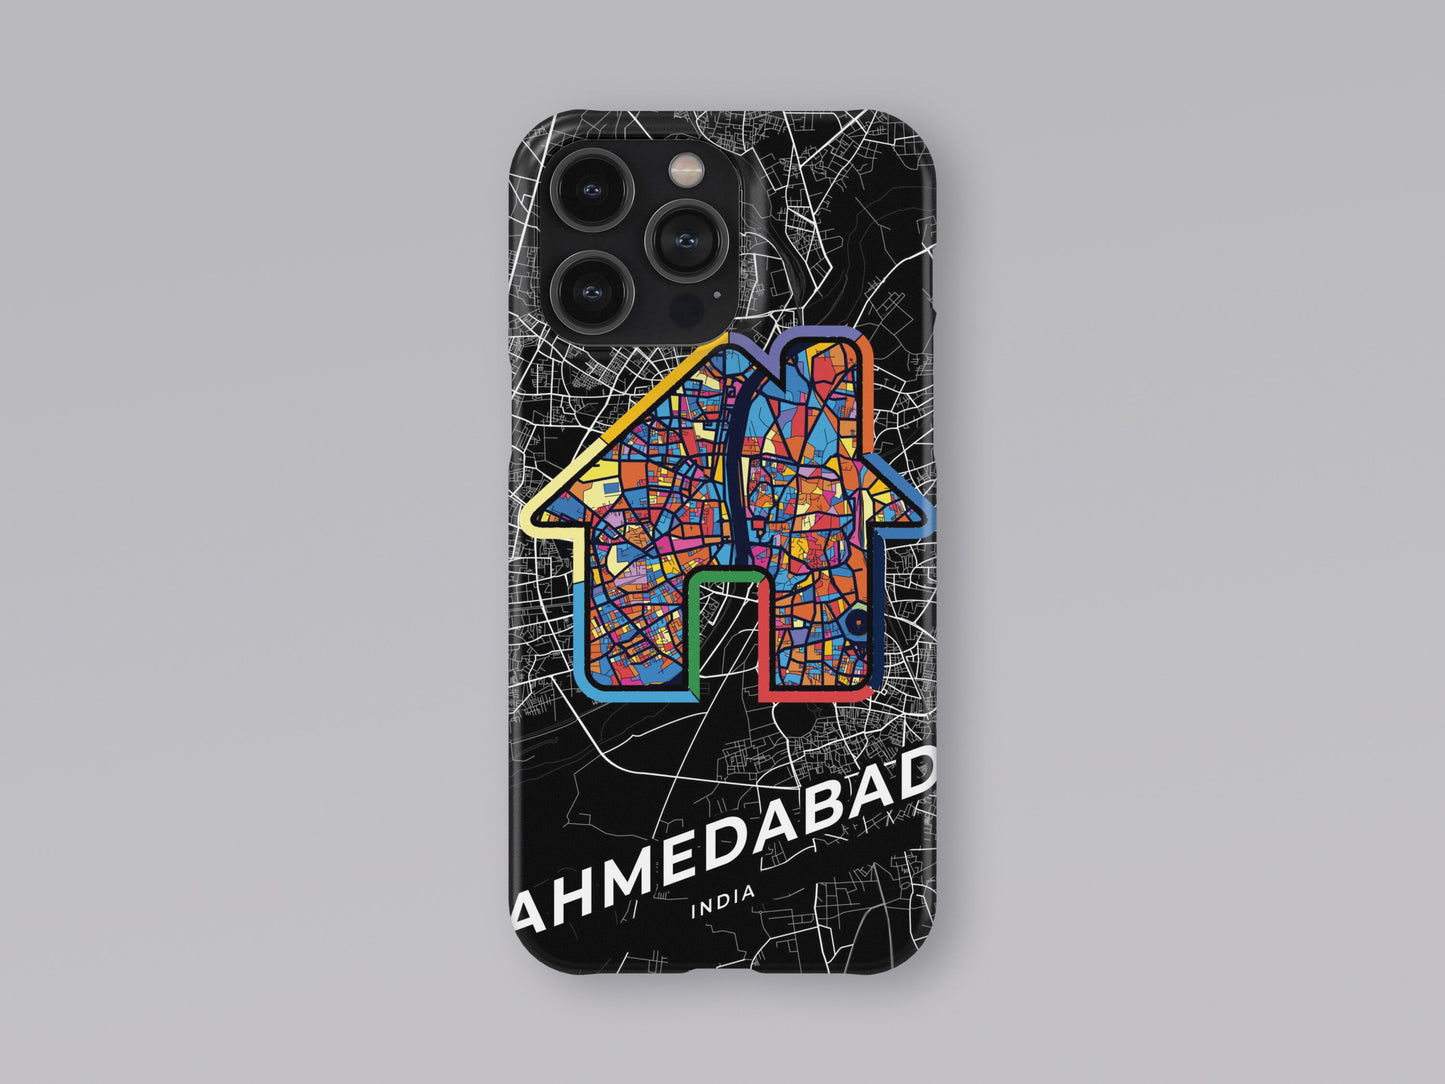 Ahmedabad India slim phone case with colorful icon. Birthday, wedding or housewarming gift. Couple match cases. 3